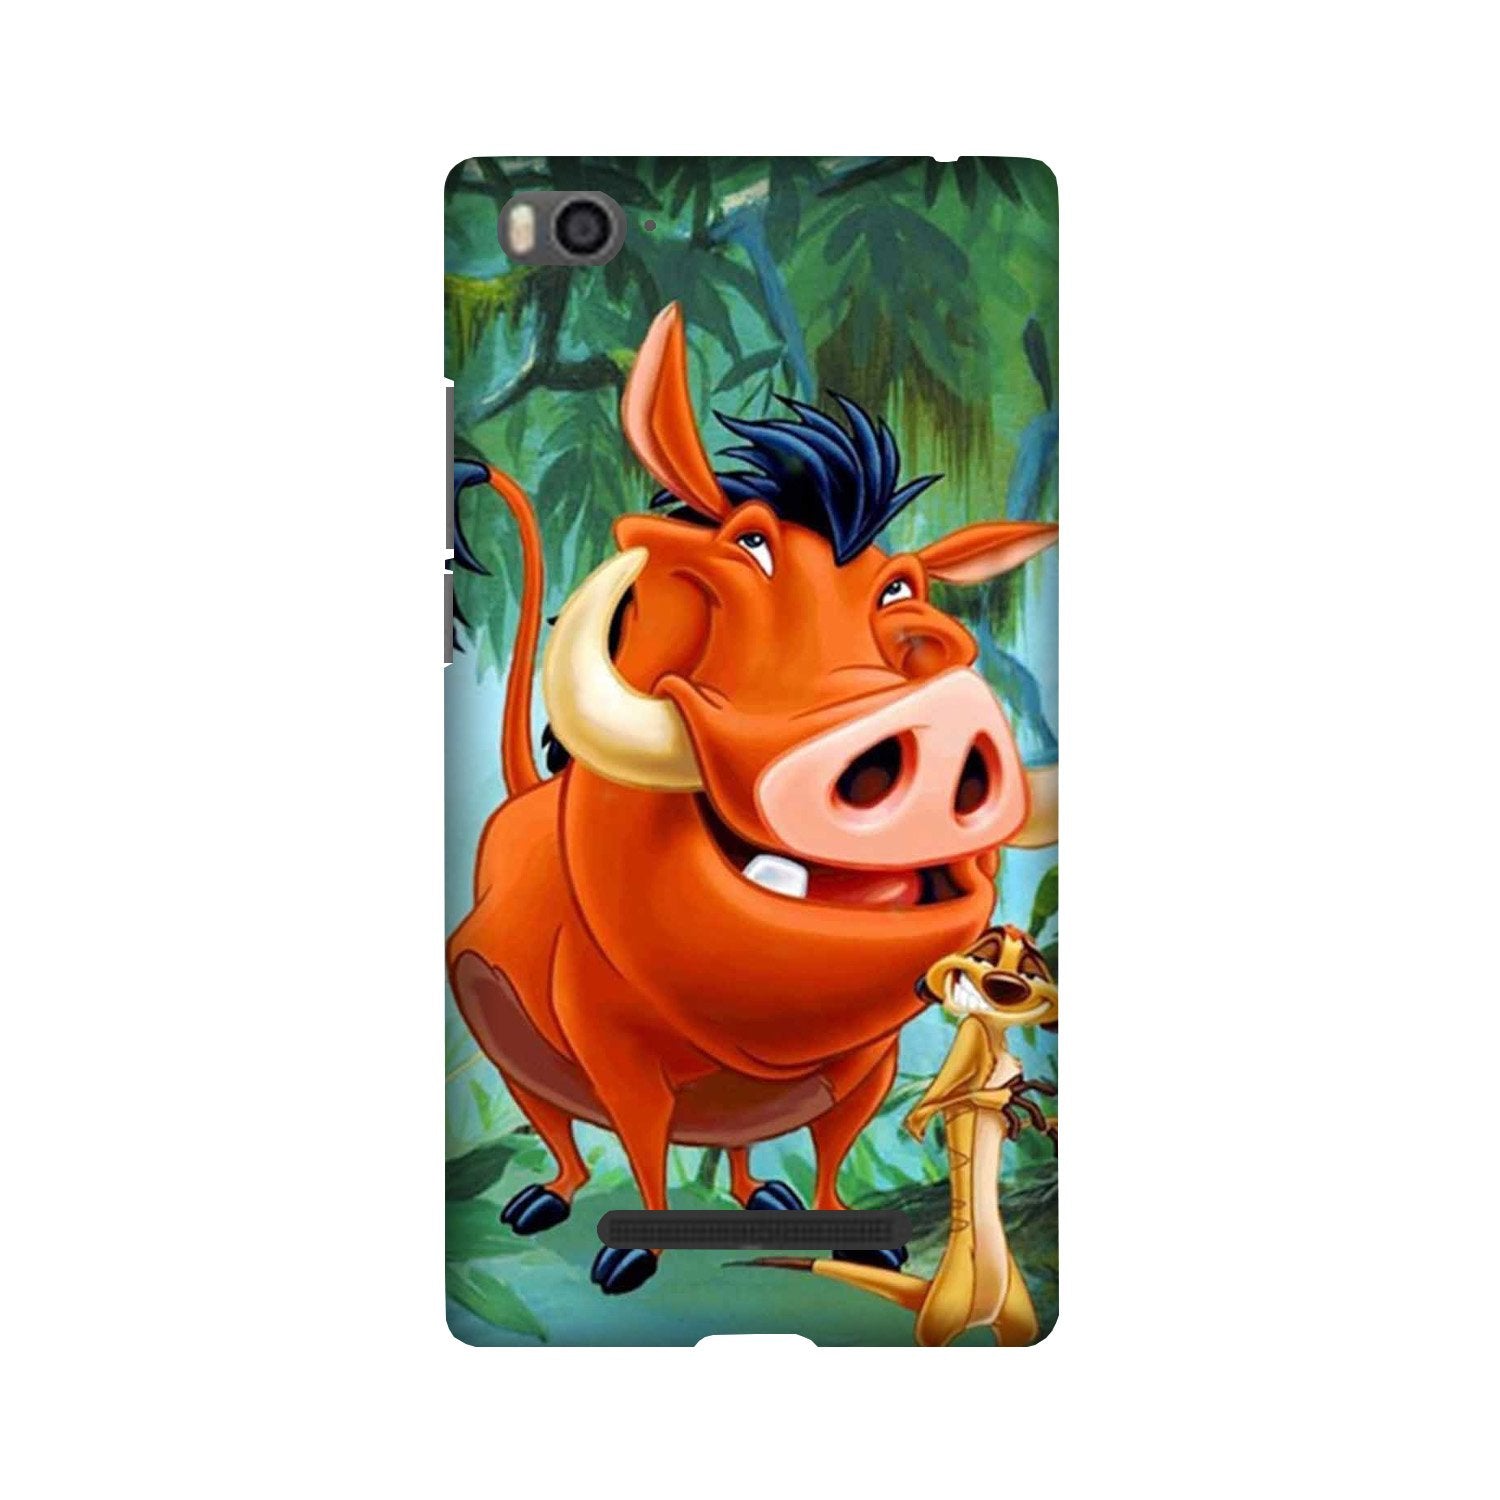 Timon and Pumbaa Mobile Back Case for Redmi 4A(Design - 305)